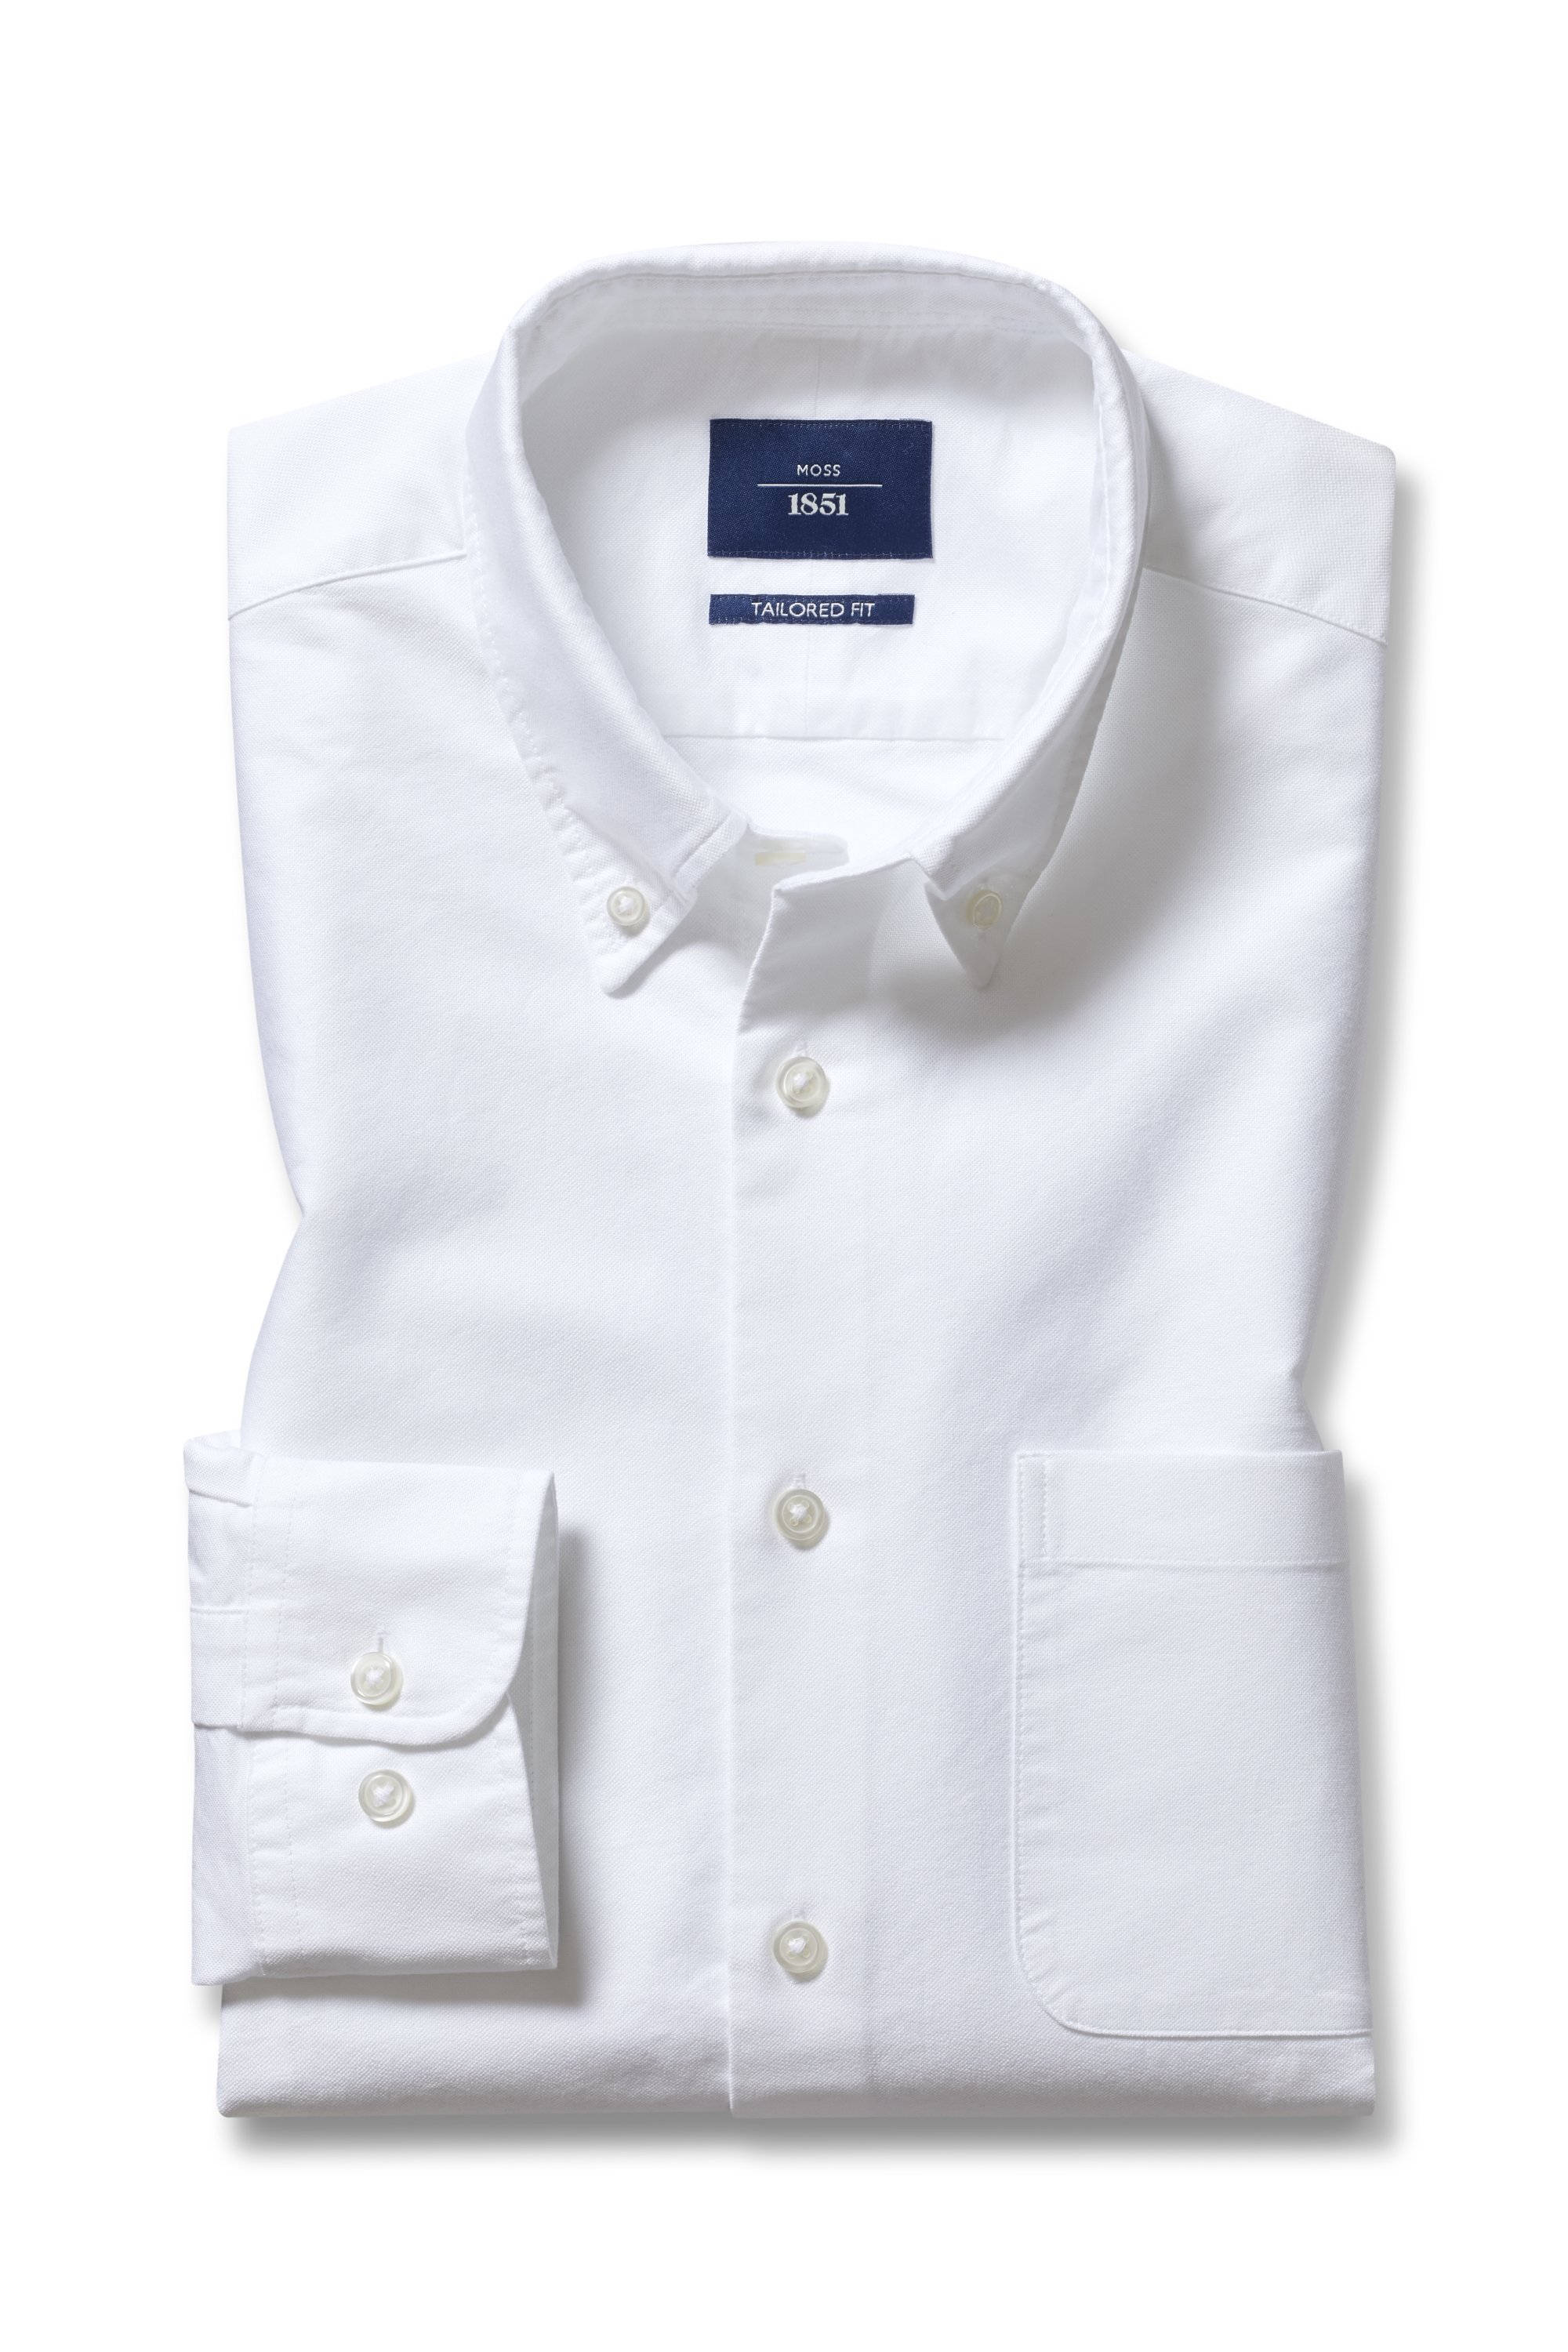 Tailored Fit White Oxford Button Down Collar | Buy Online at Moss